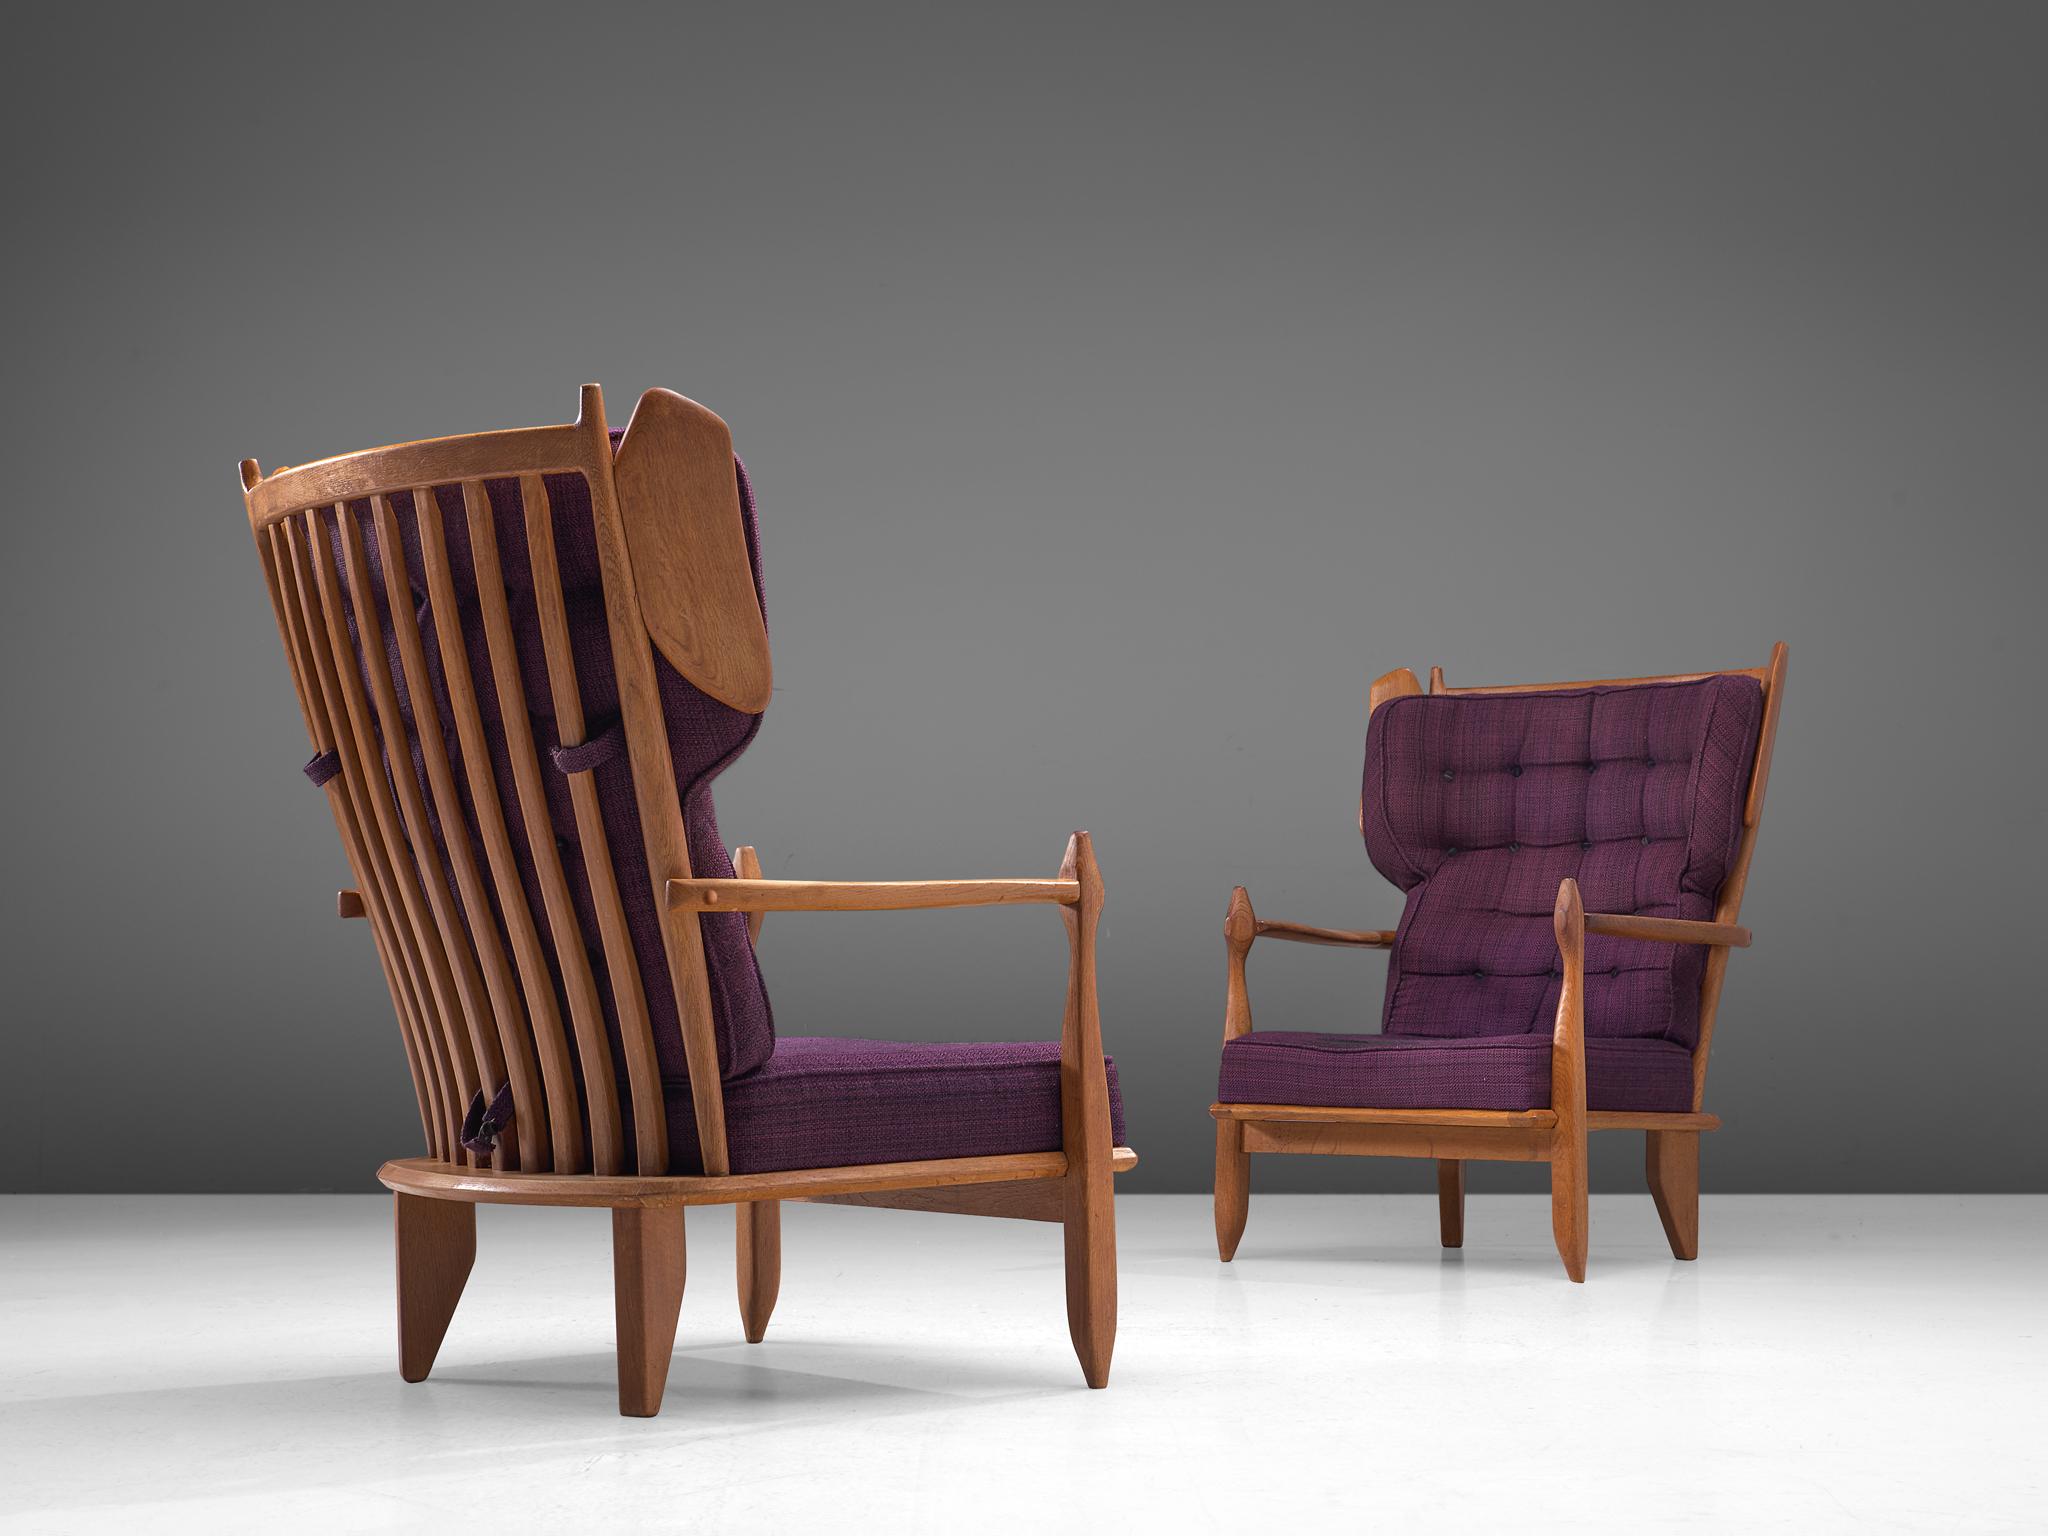 Guillerme et Chambron, pair of lounge chairs, oak and fabric, France, 1960s.

Guillerme and Chambron are known for their high quality solid oak furniture, from which these are a great example. These high back chairs with wings have an interesting,